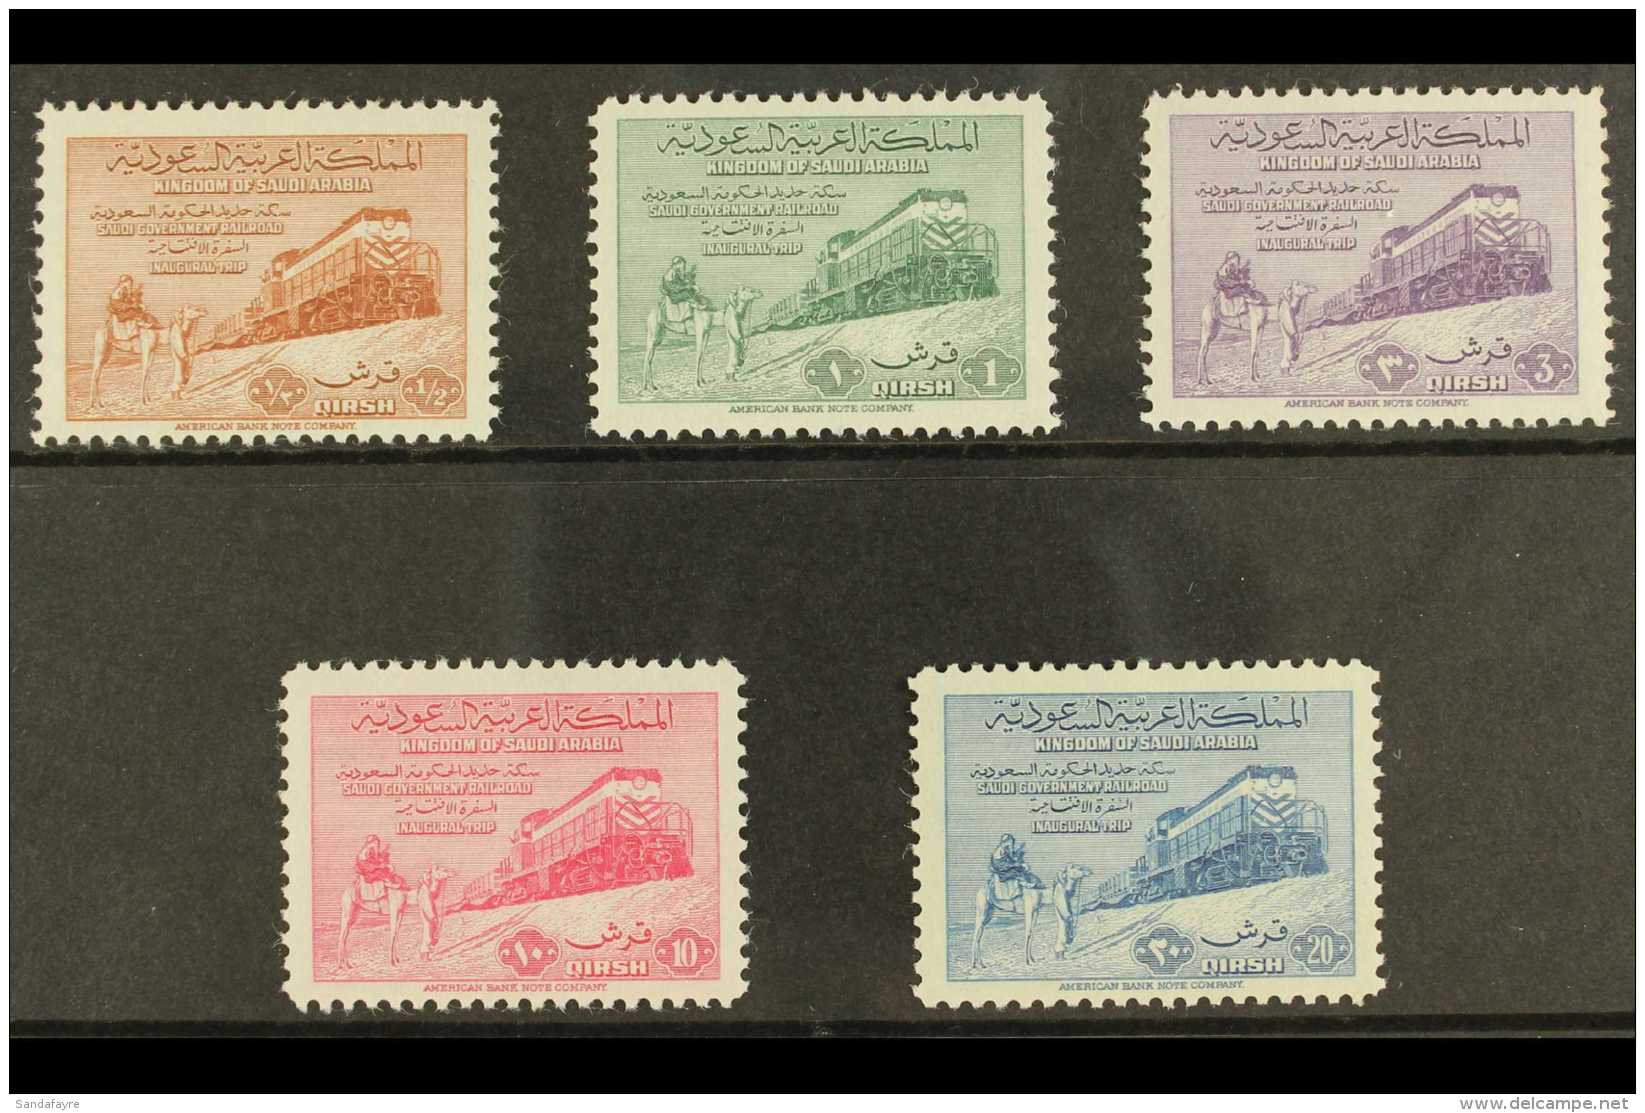 1952 Dammam-Riyadh Railway Complete Set, SG 372/376, Very Fine Mint, Only Very Lightly Hinged. (5 Stamps) For More... - Saoedi-Arabië